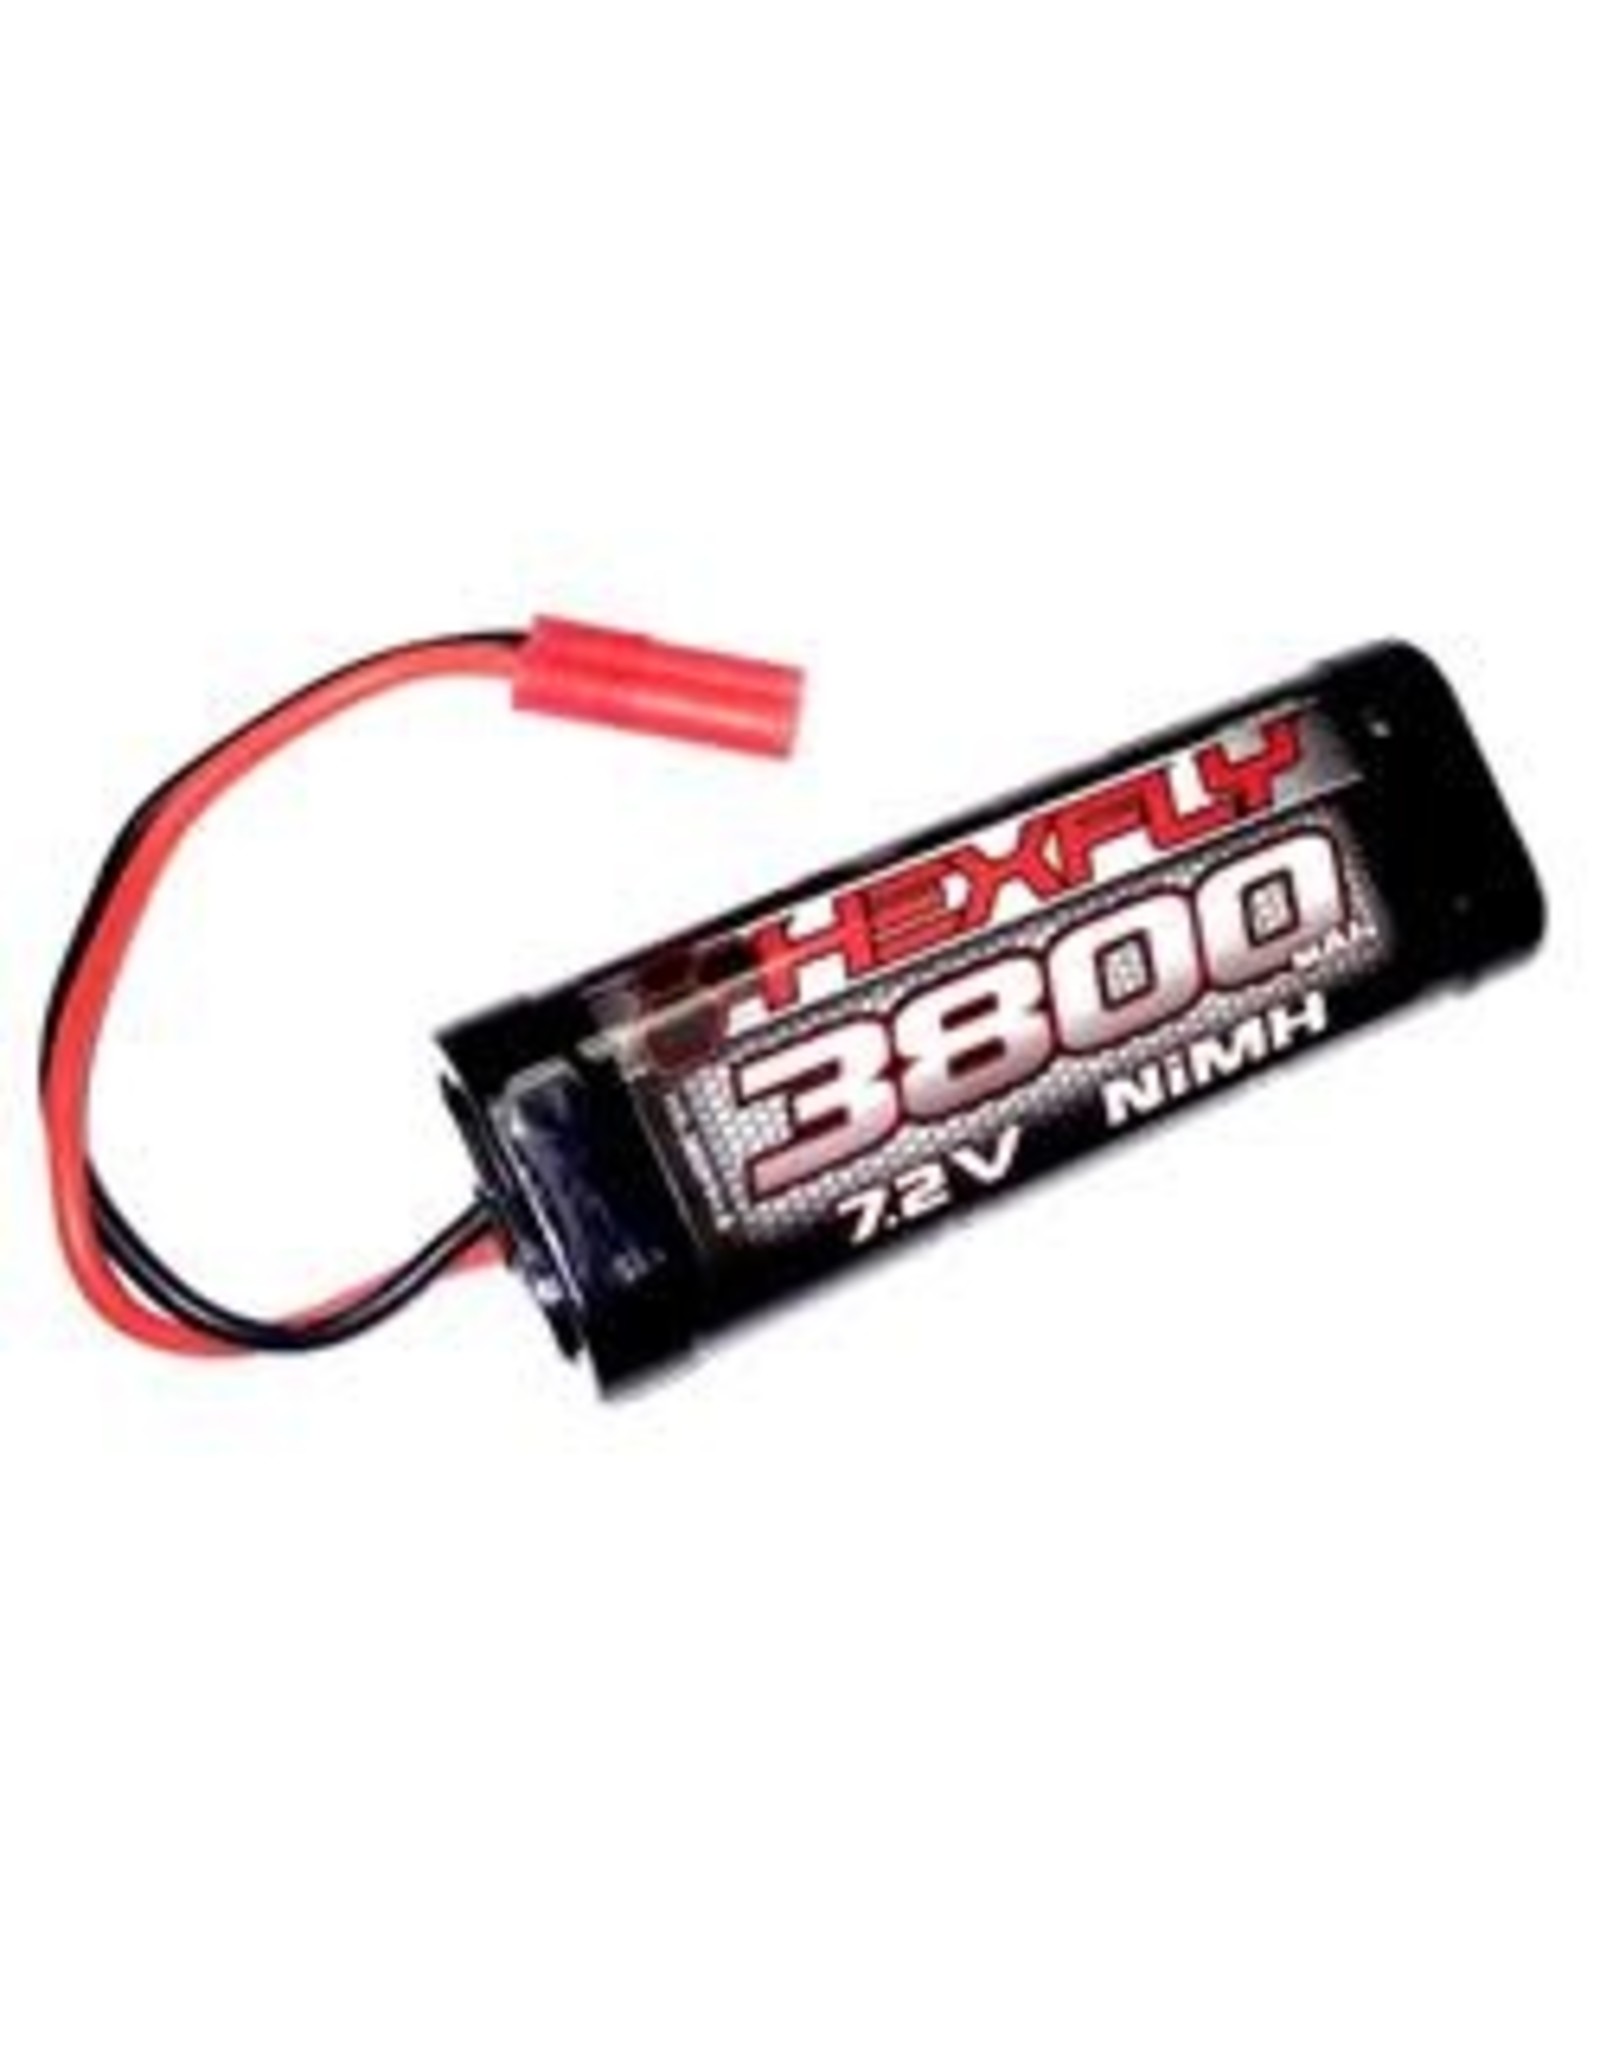 Redcat Racing Hexfly 3800mAh Ni-MH Battery - 7.2V with Banana 4.0 Connector